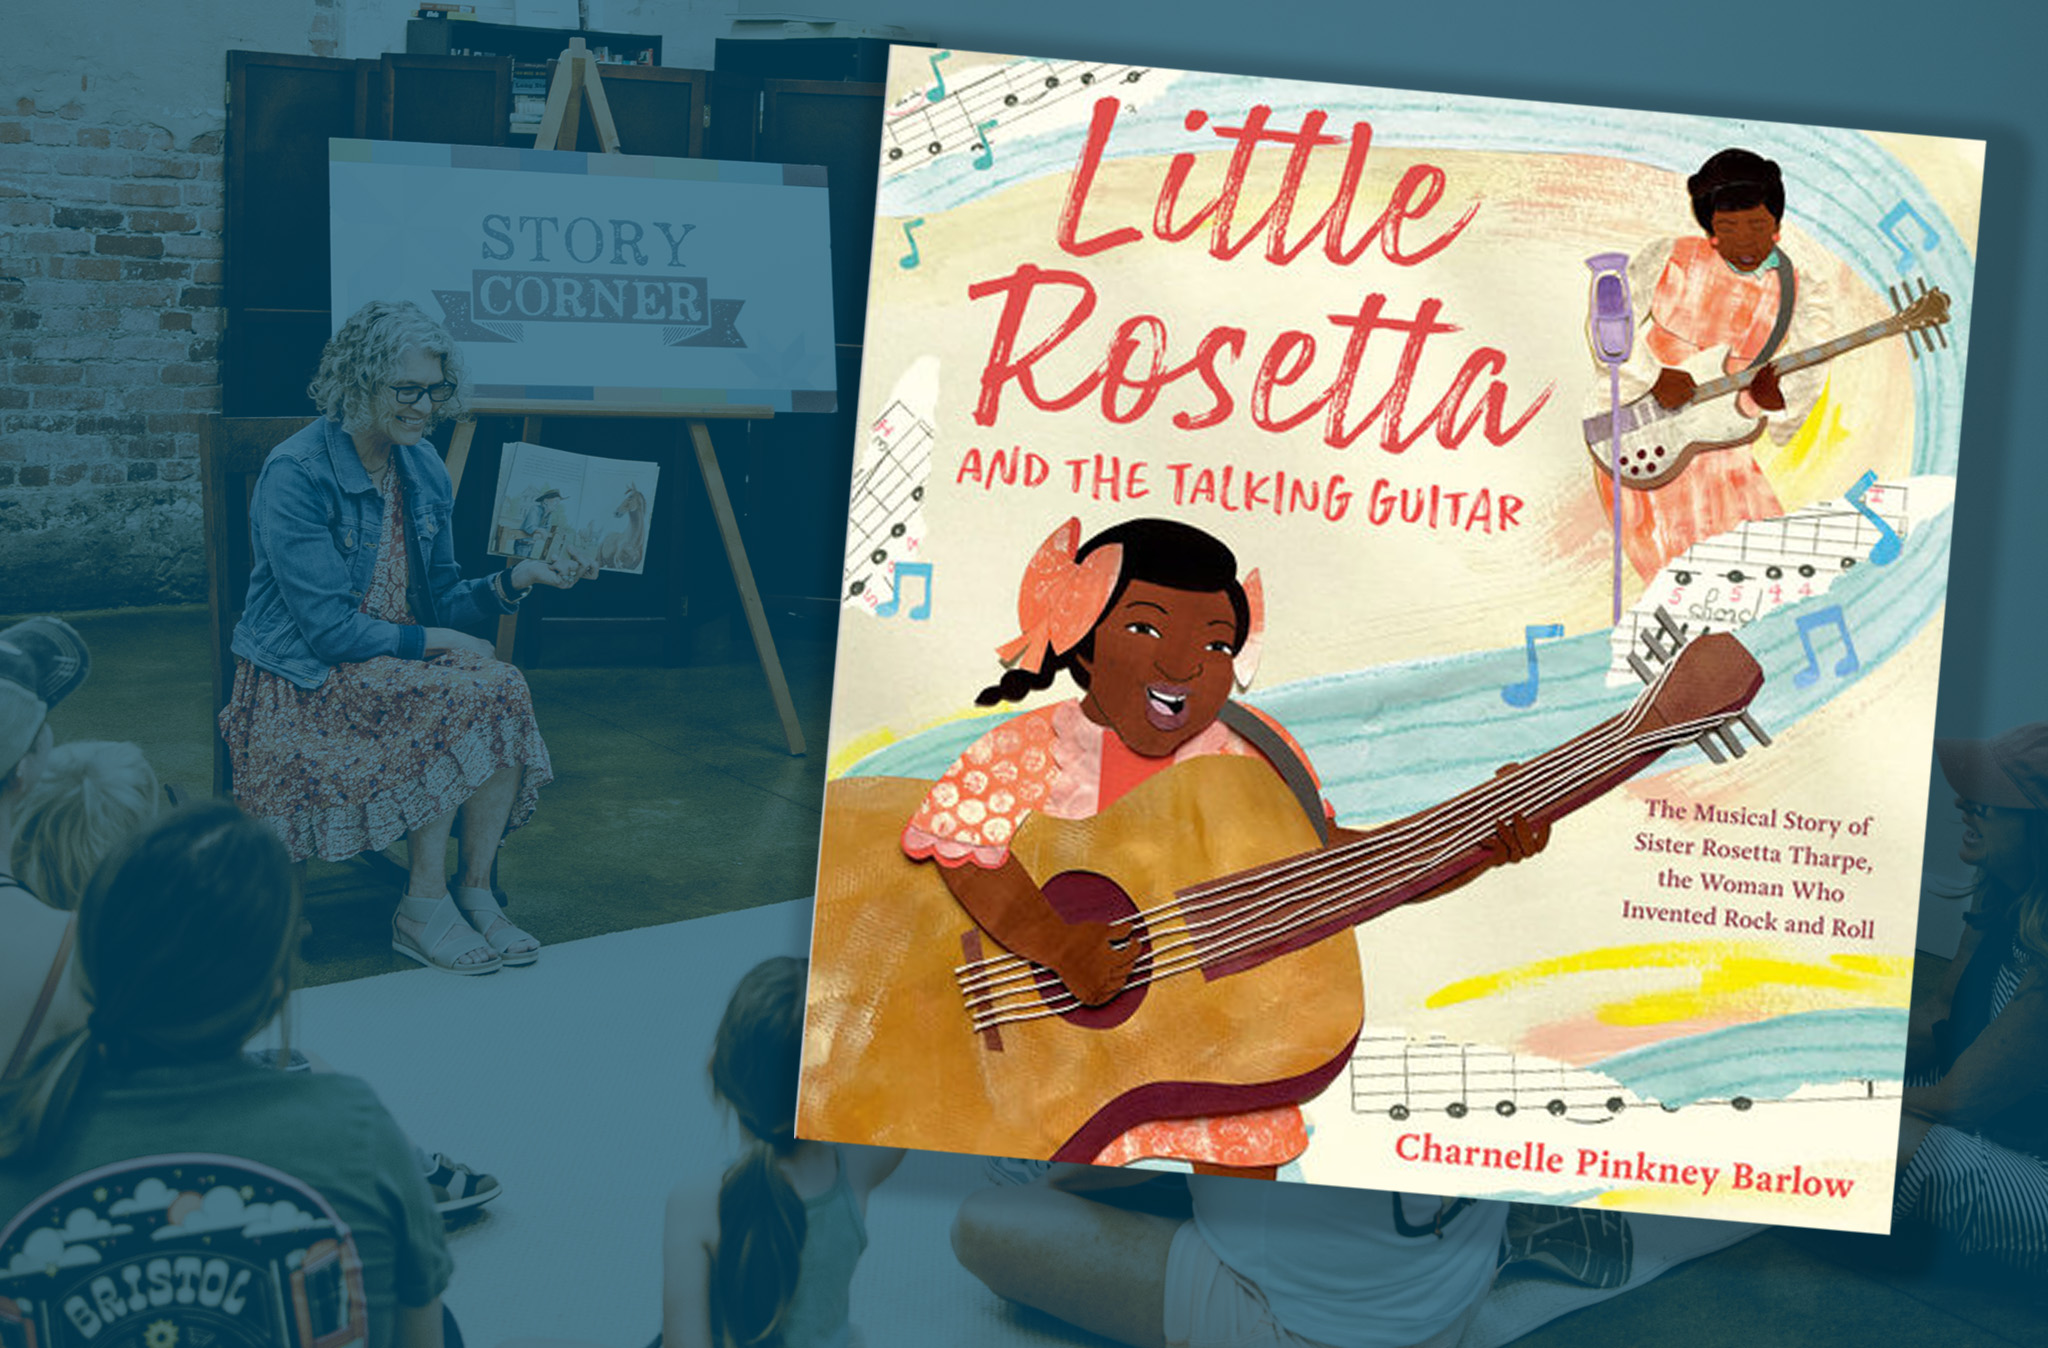 Museum Story Time – “Little Rosetta and the Talking Guitar: The Musical Story of Sister Rosetta Tharpe, the Woman Who Invented Rock and Roll” by Charnelle Pinkney Barlow